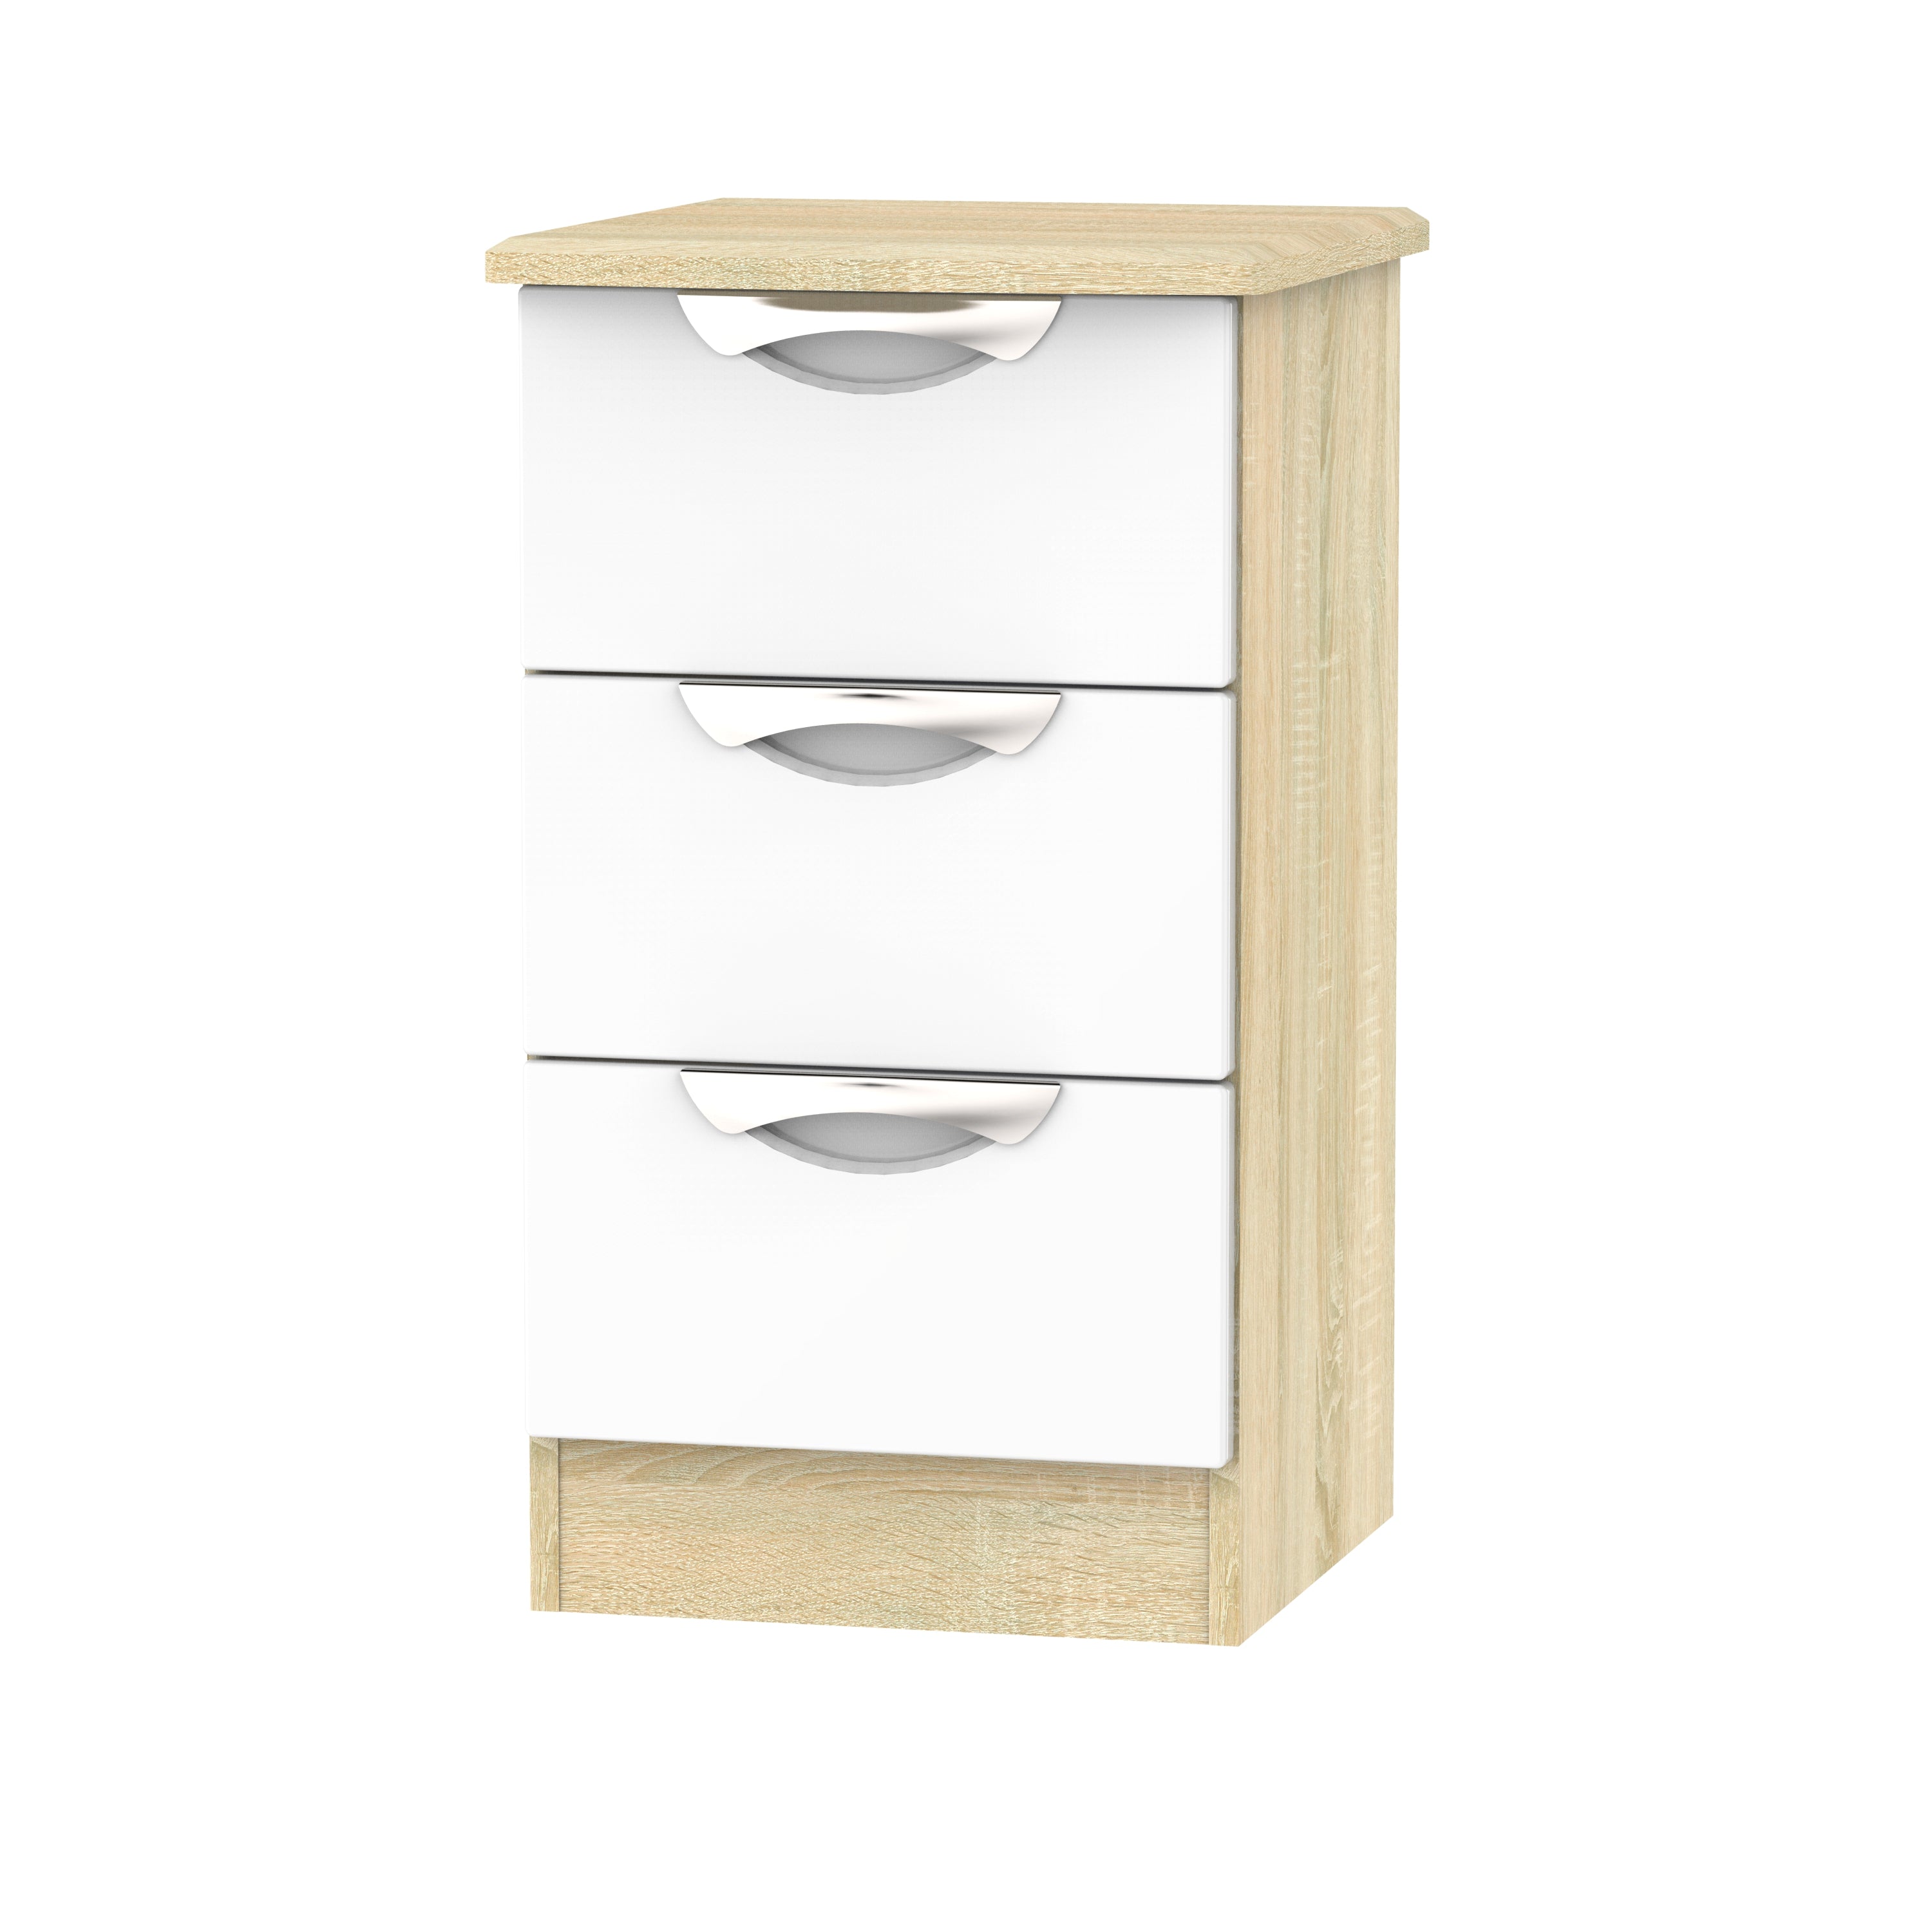 Cairo Ready Assembled Bedside Table with 3 Drawers  - White Gloss & Bardolino Oak - Lewis’s Home  | TJ Hughes